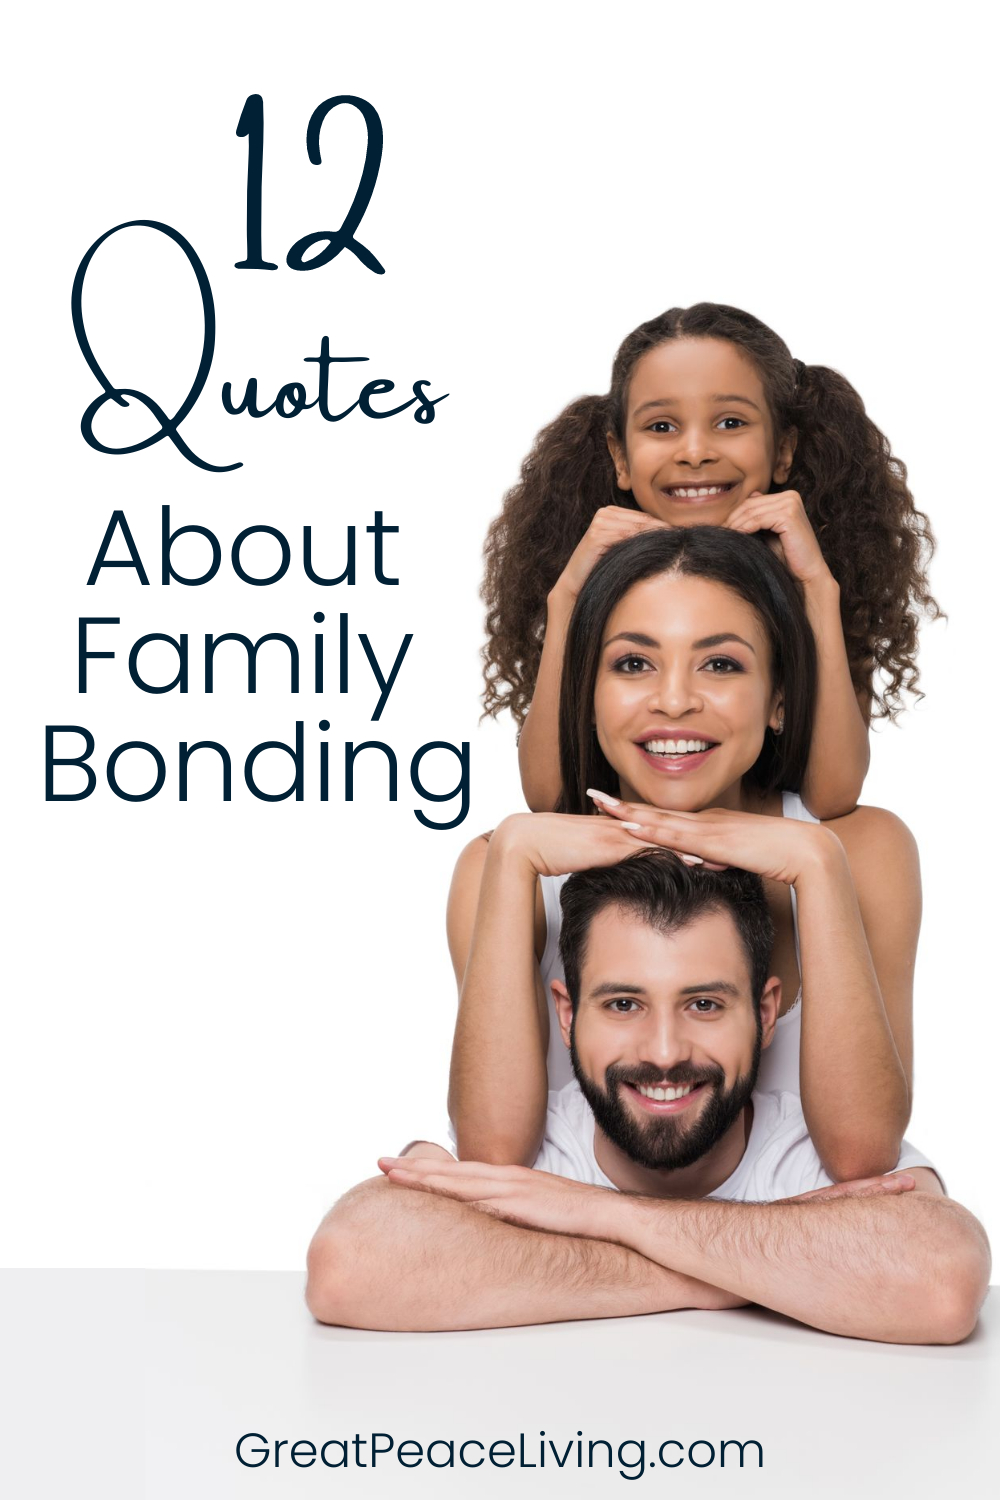 12 Family Bonding Quotes to Inspire Your Family